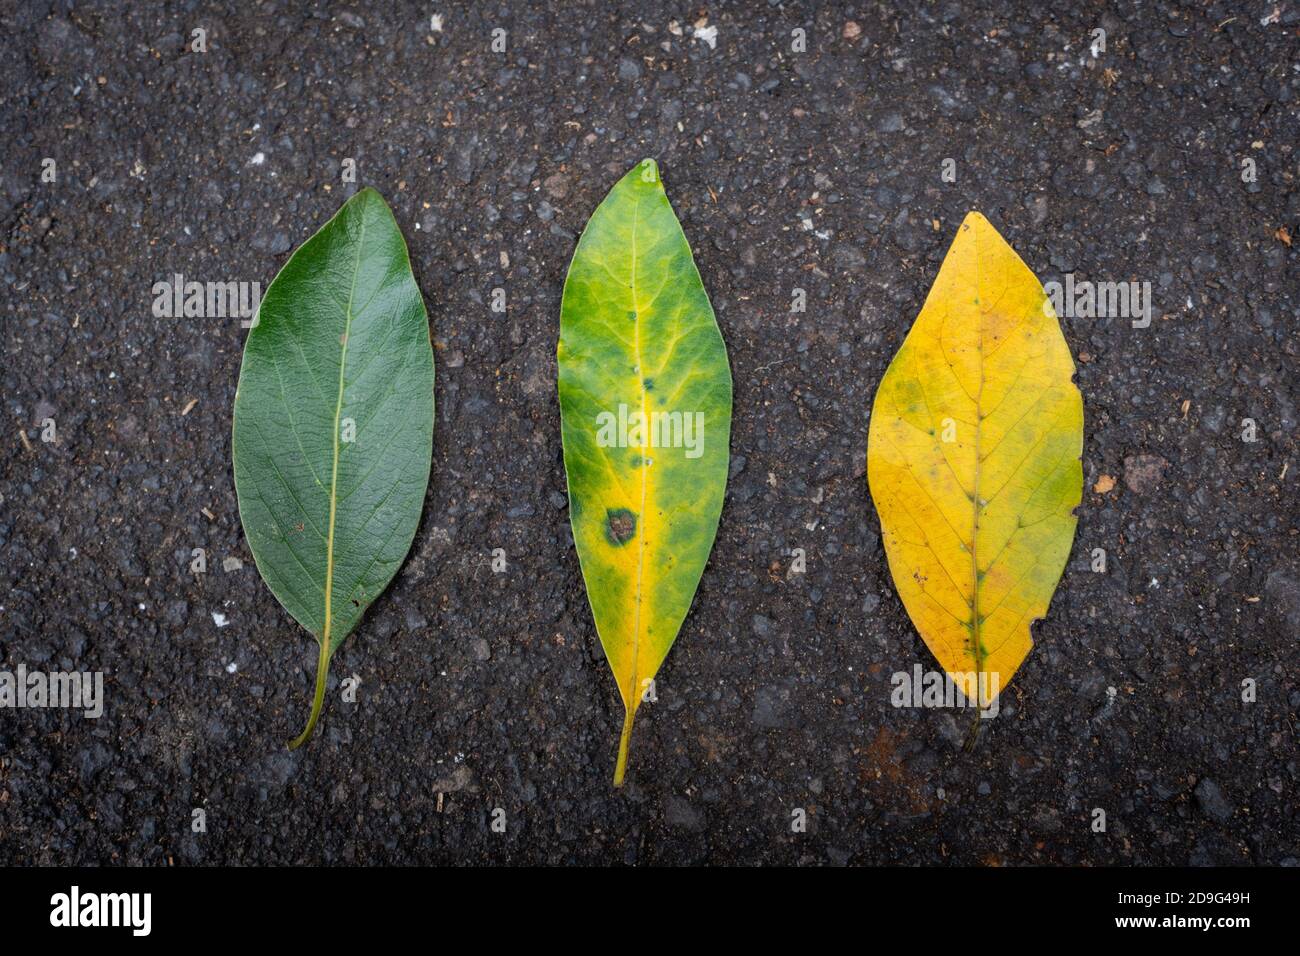 Summer October Leaf color changes from green to yellow Stock Photo